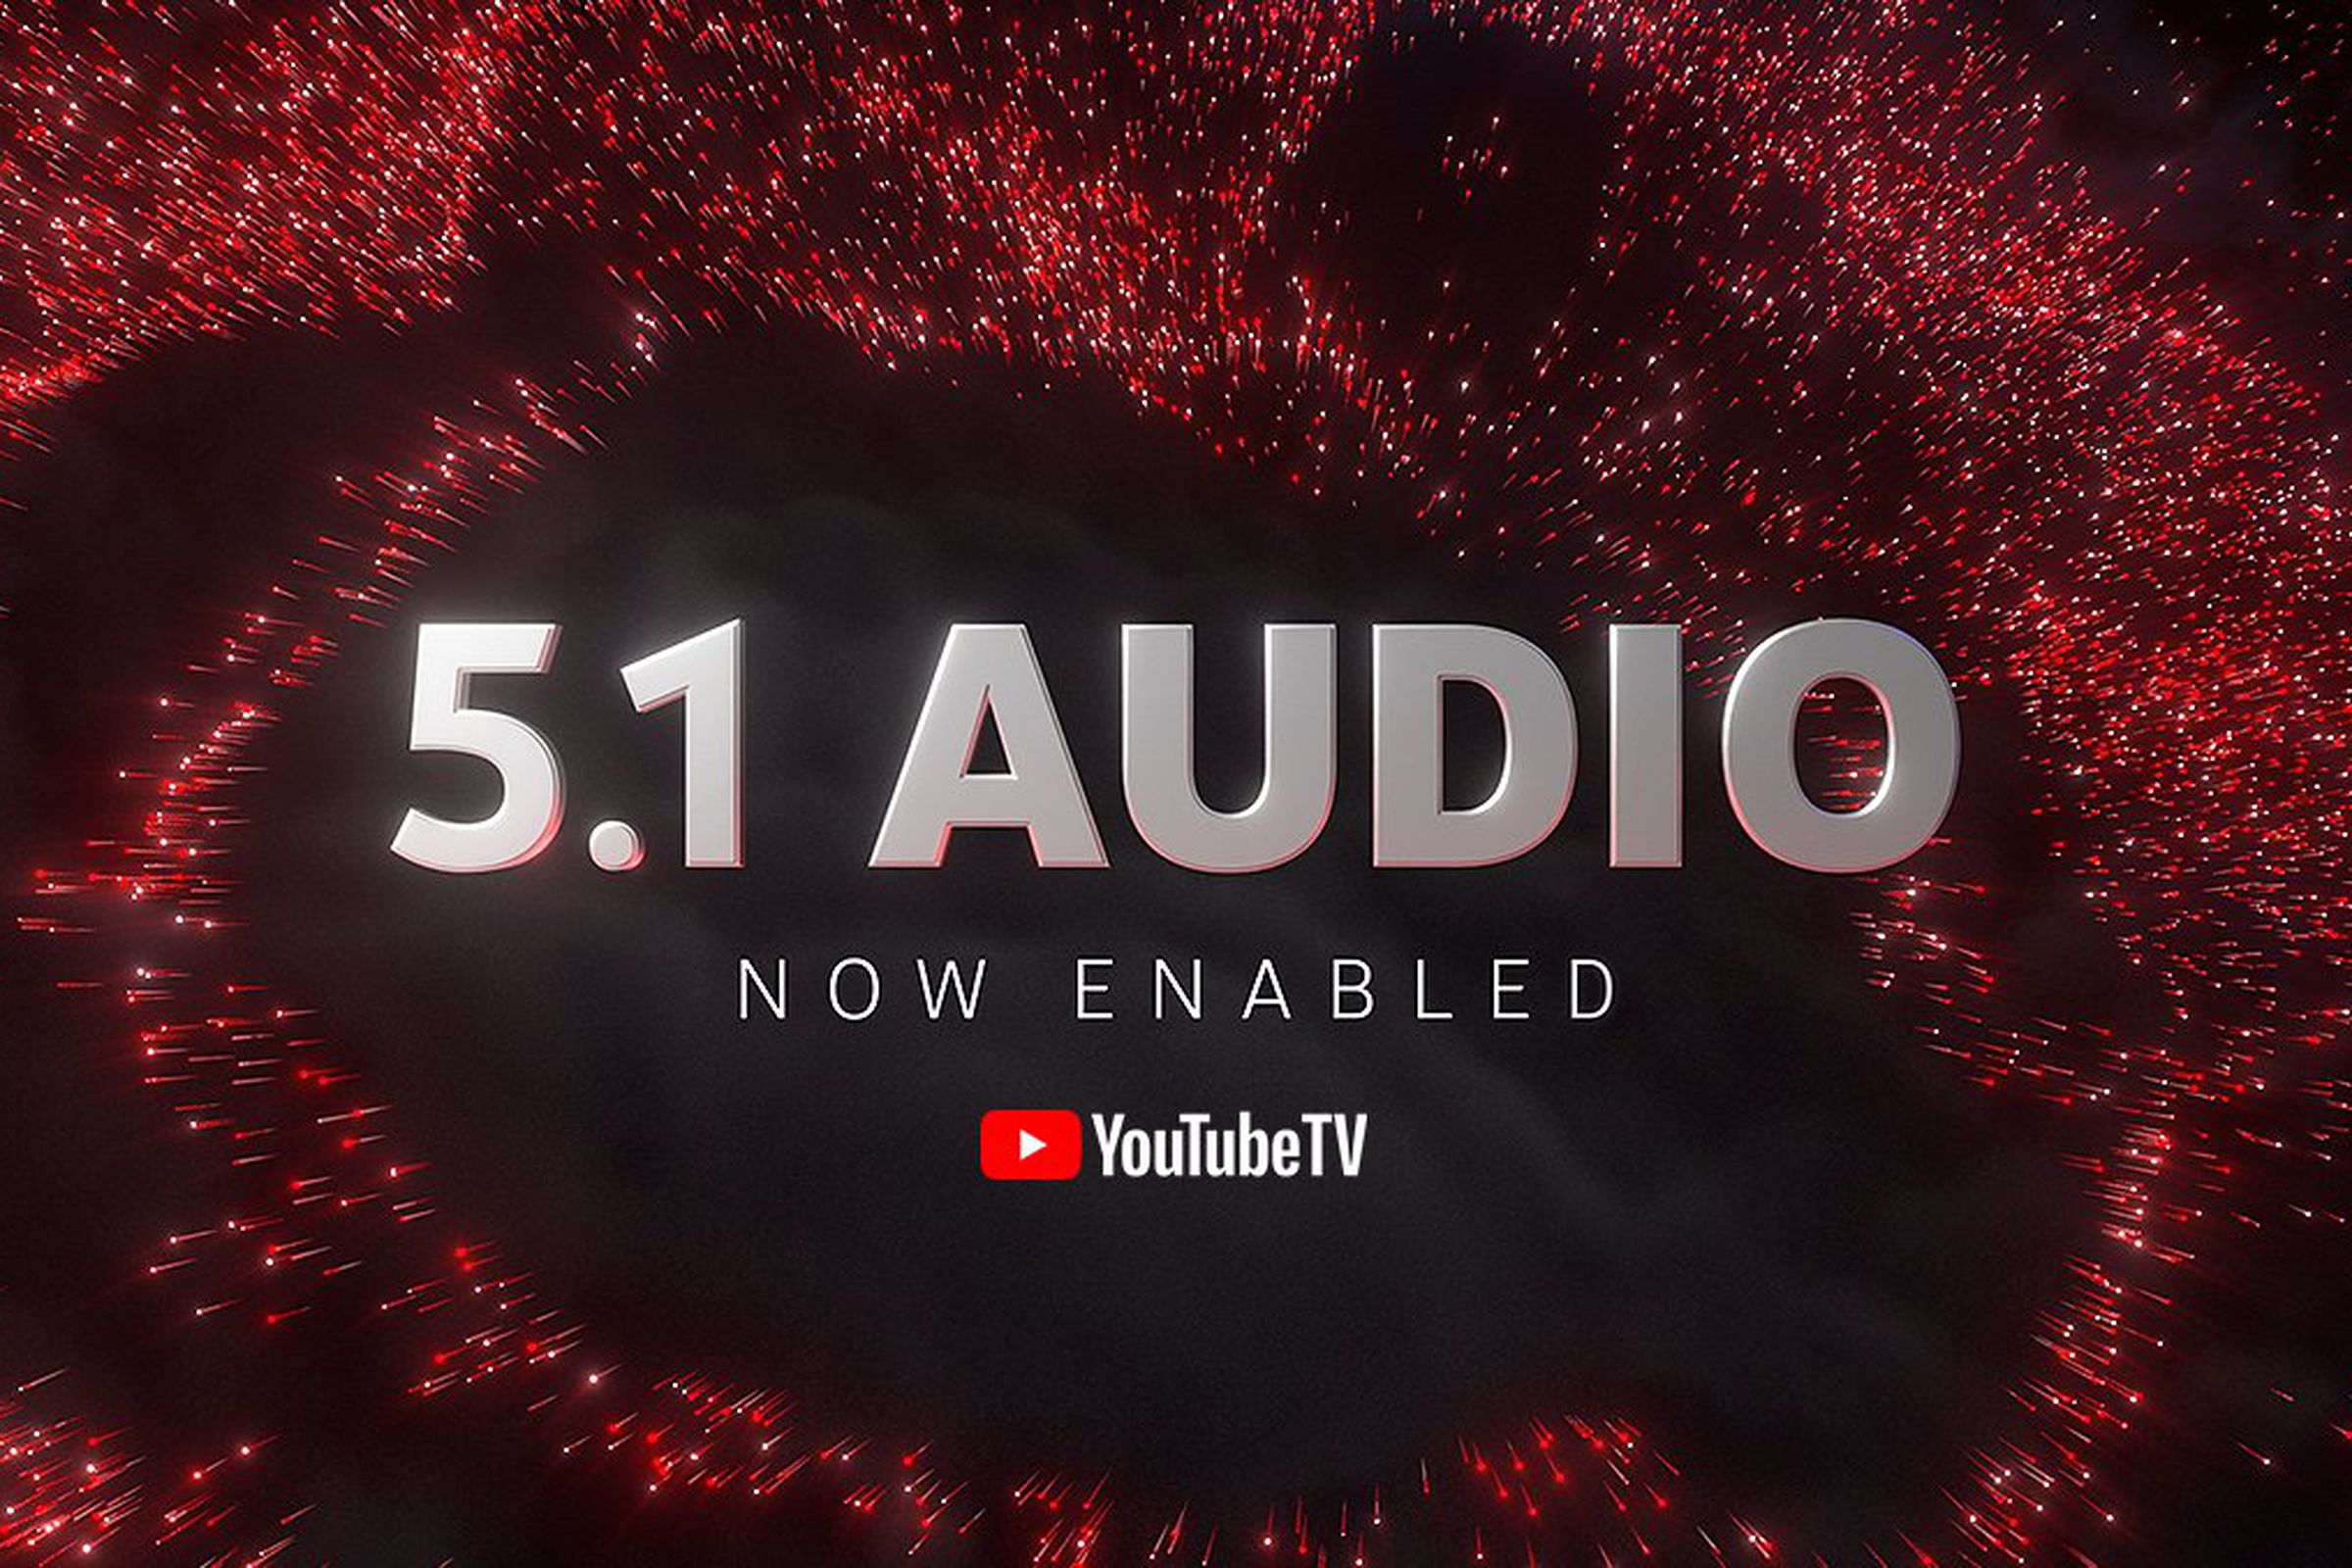 Floating into a space black hole is a “5.1 AUDIO” text in bold and silver 3D, with “now enabled” in smaller white text underneath and a small YouTube TV logo under that. The black hole looks like a red circular particle render that could visual indicate “surround sound audio”